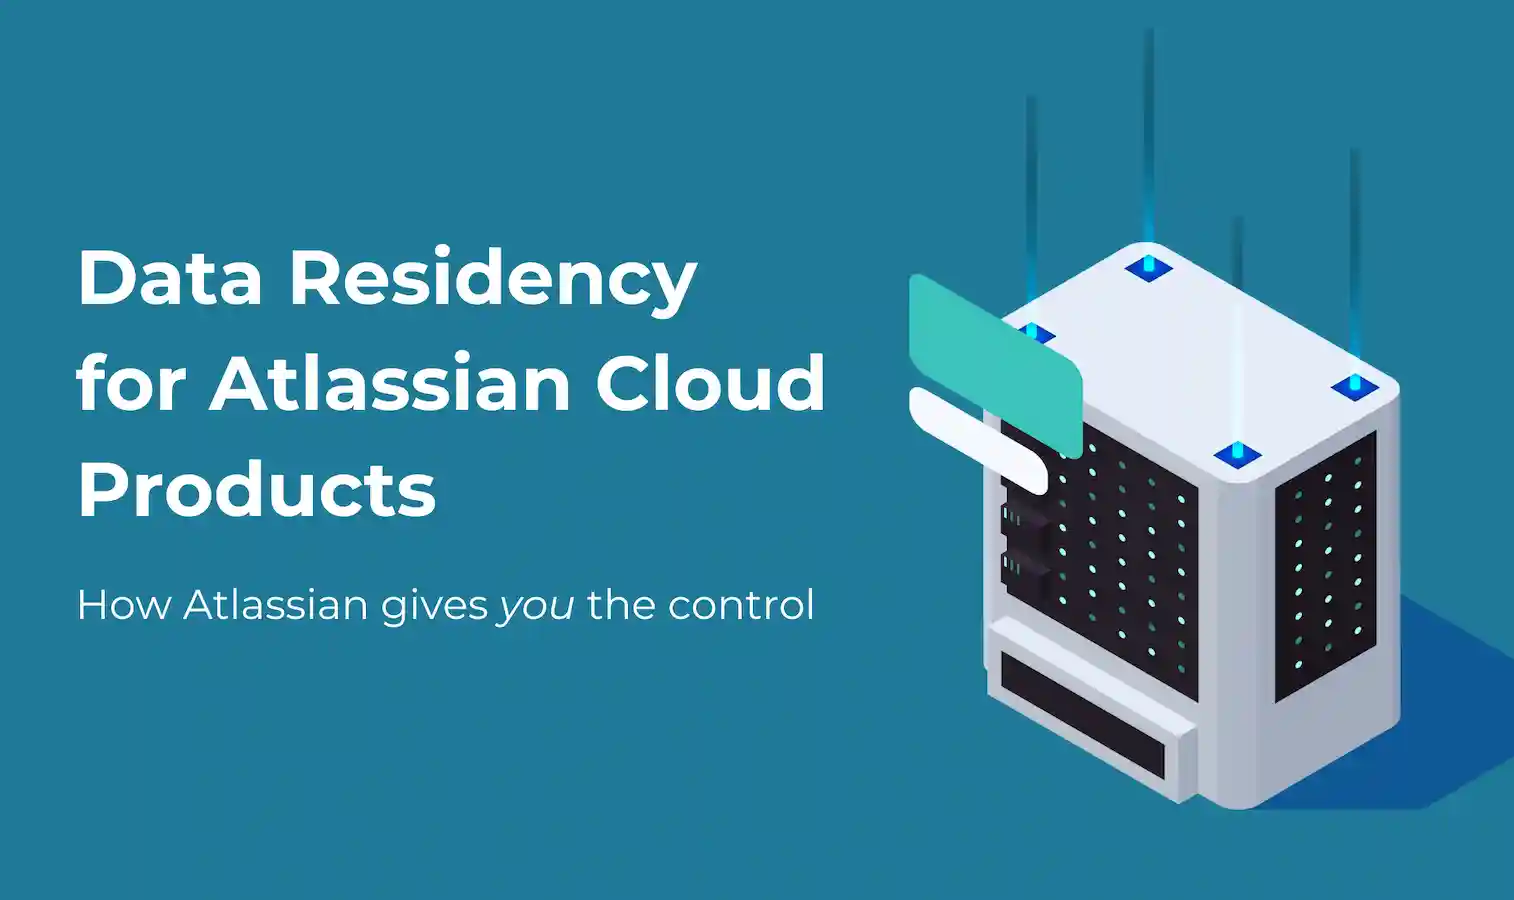 Data residency for Atlassian Cloud products